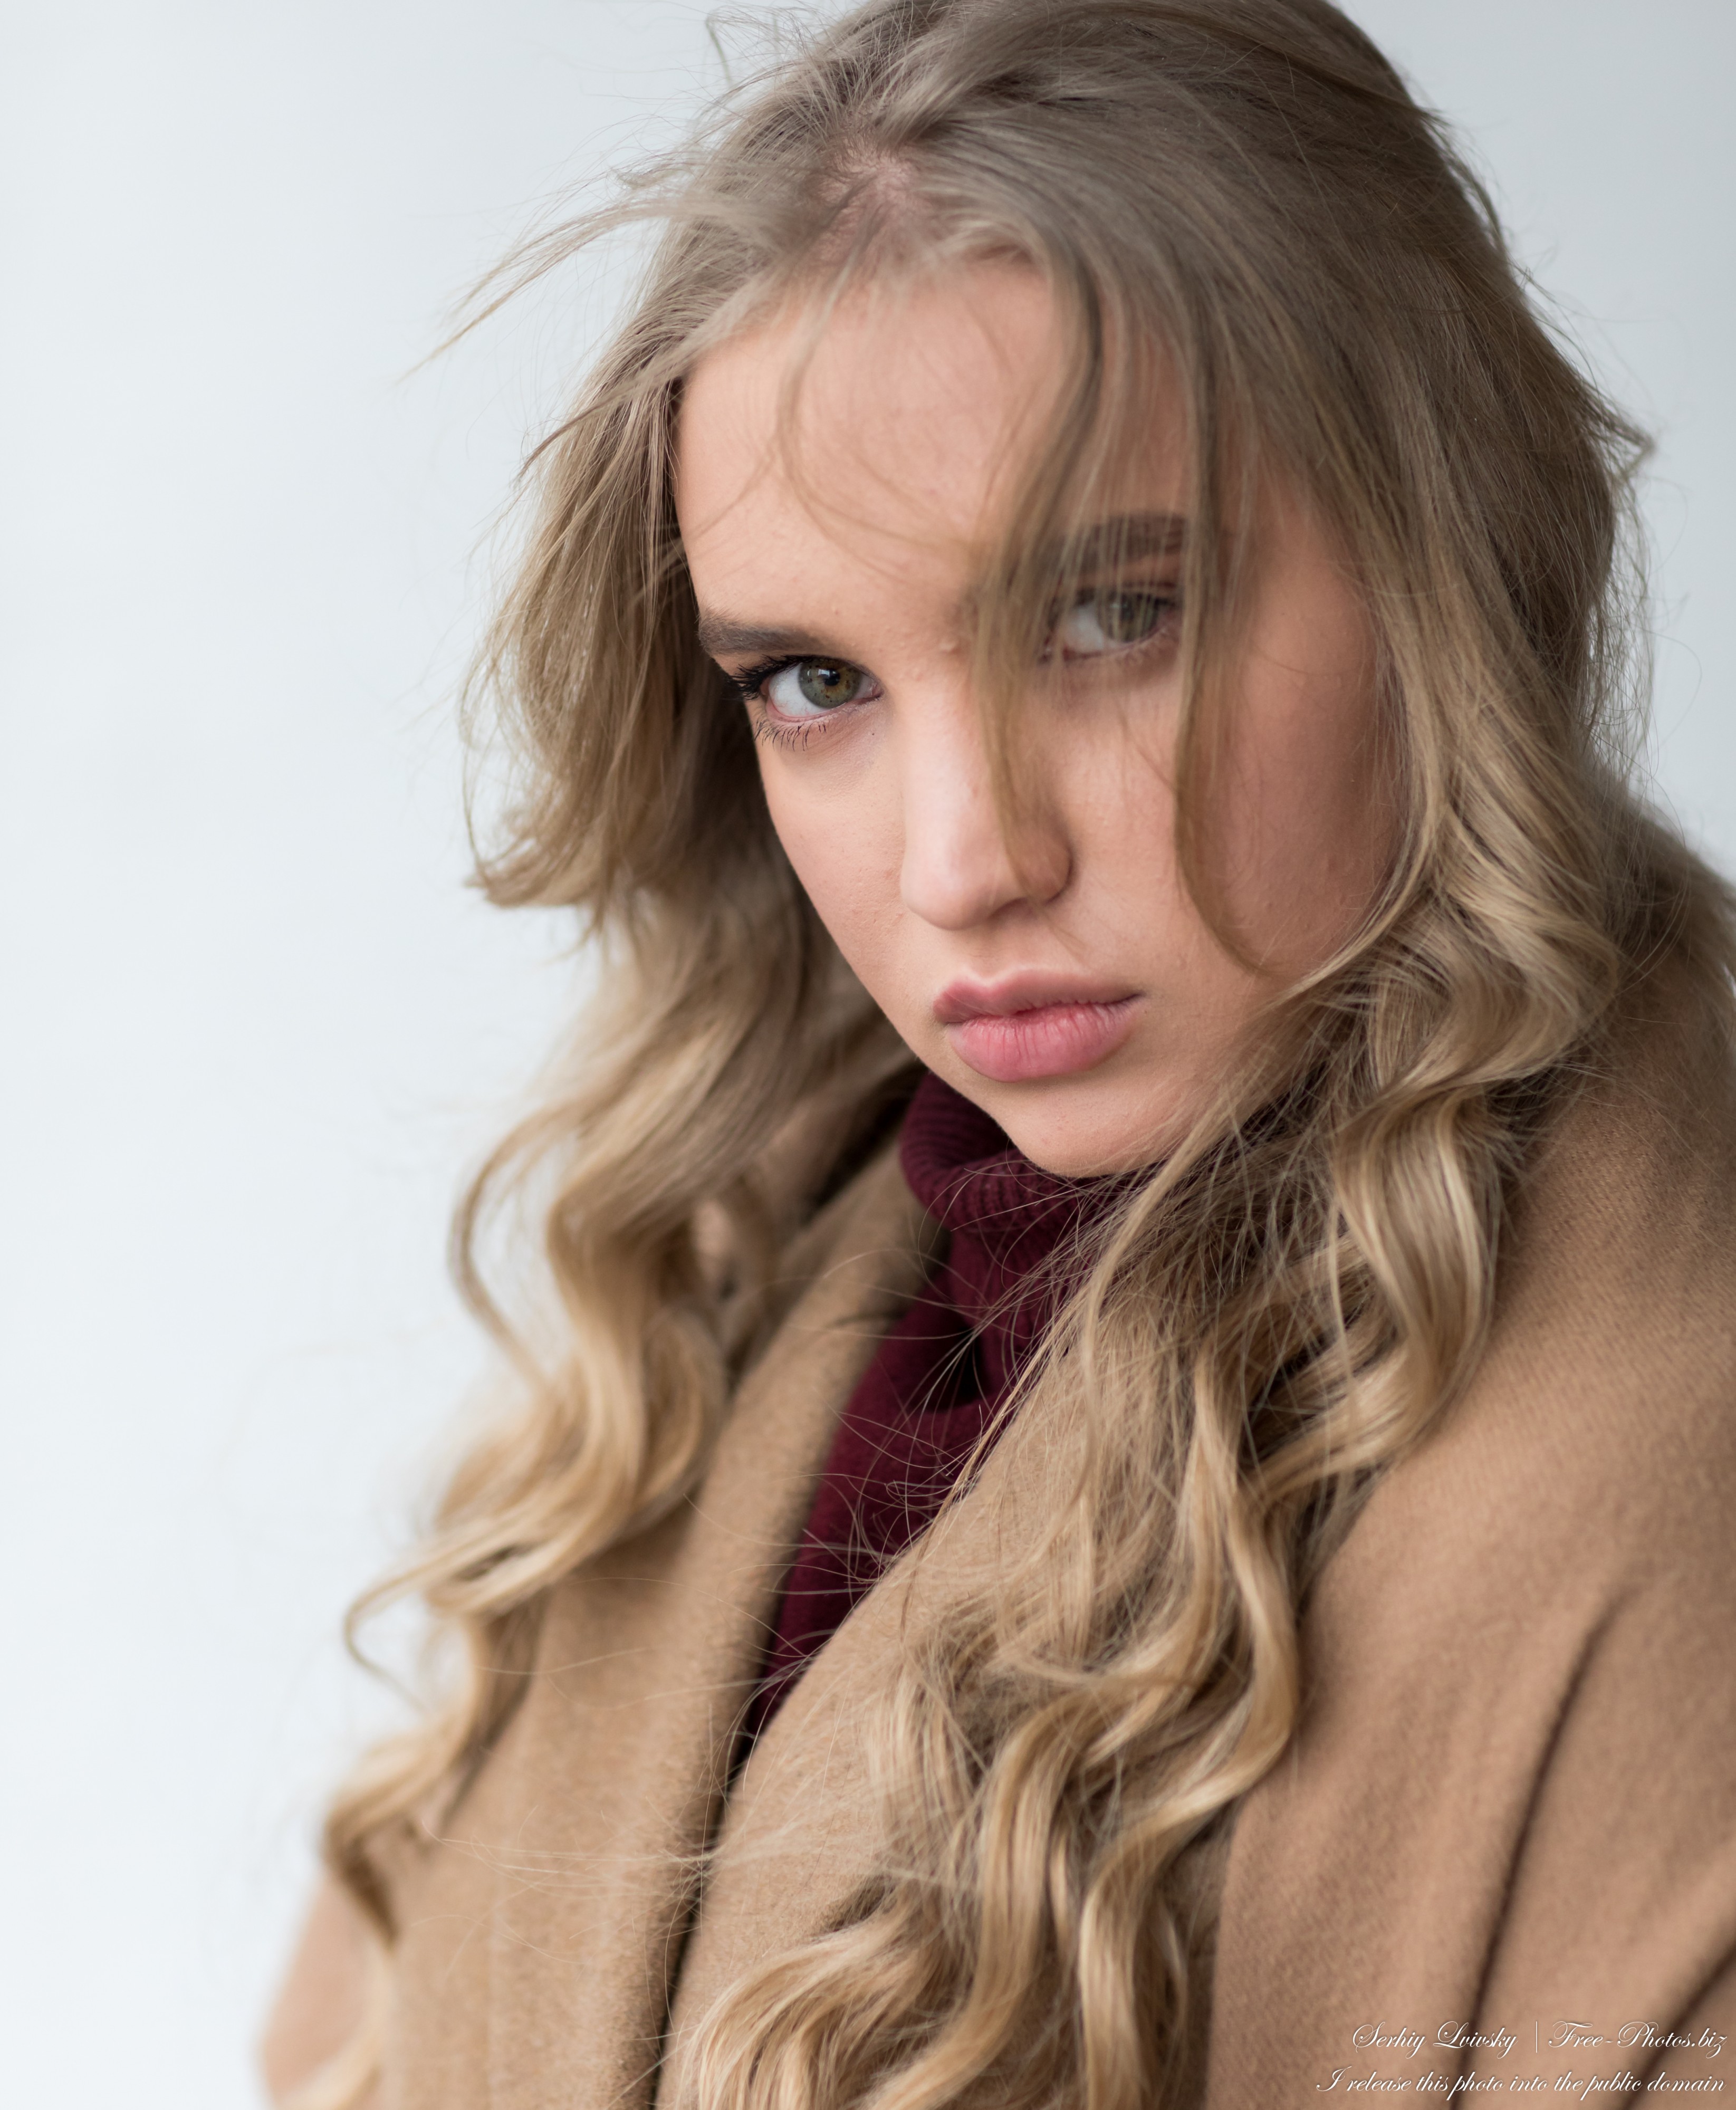 Solomia - an 18-year-old natural blonde girl photographed by Serhiy Lvivsky in February 2022, picture 1